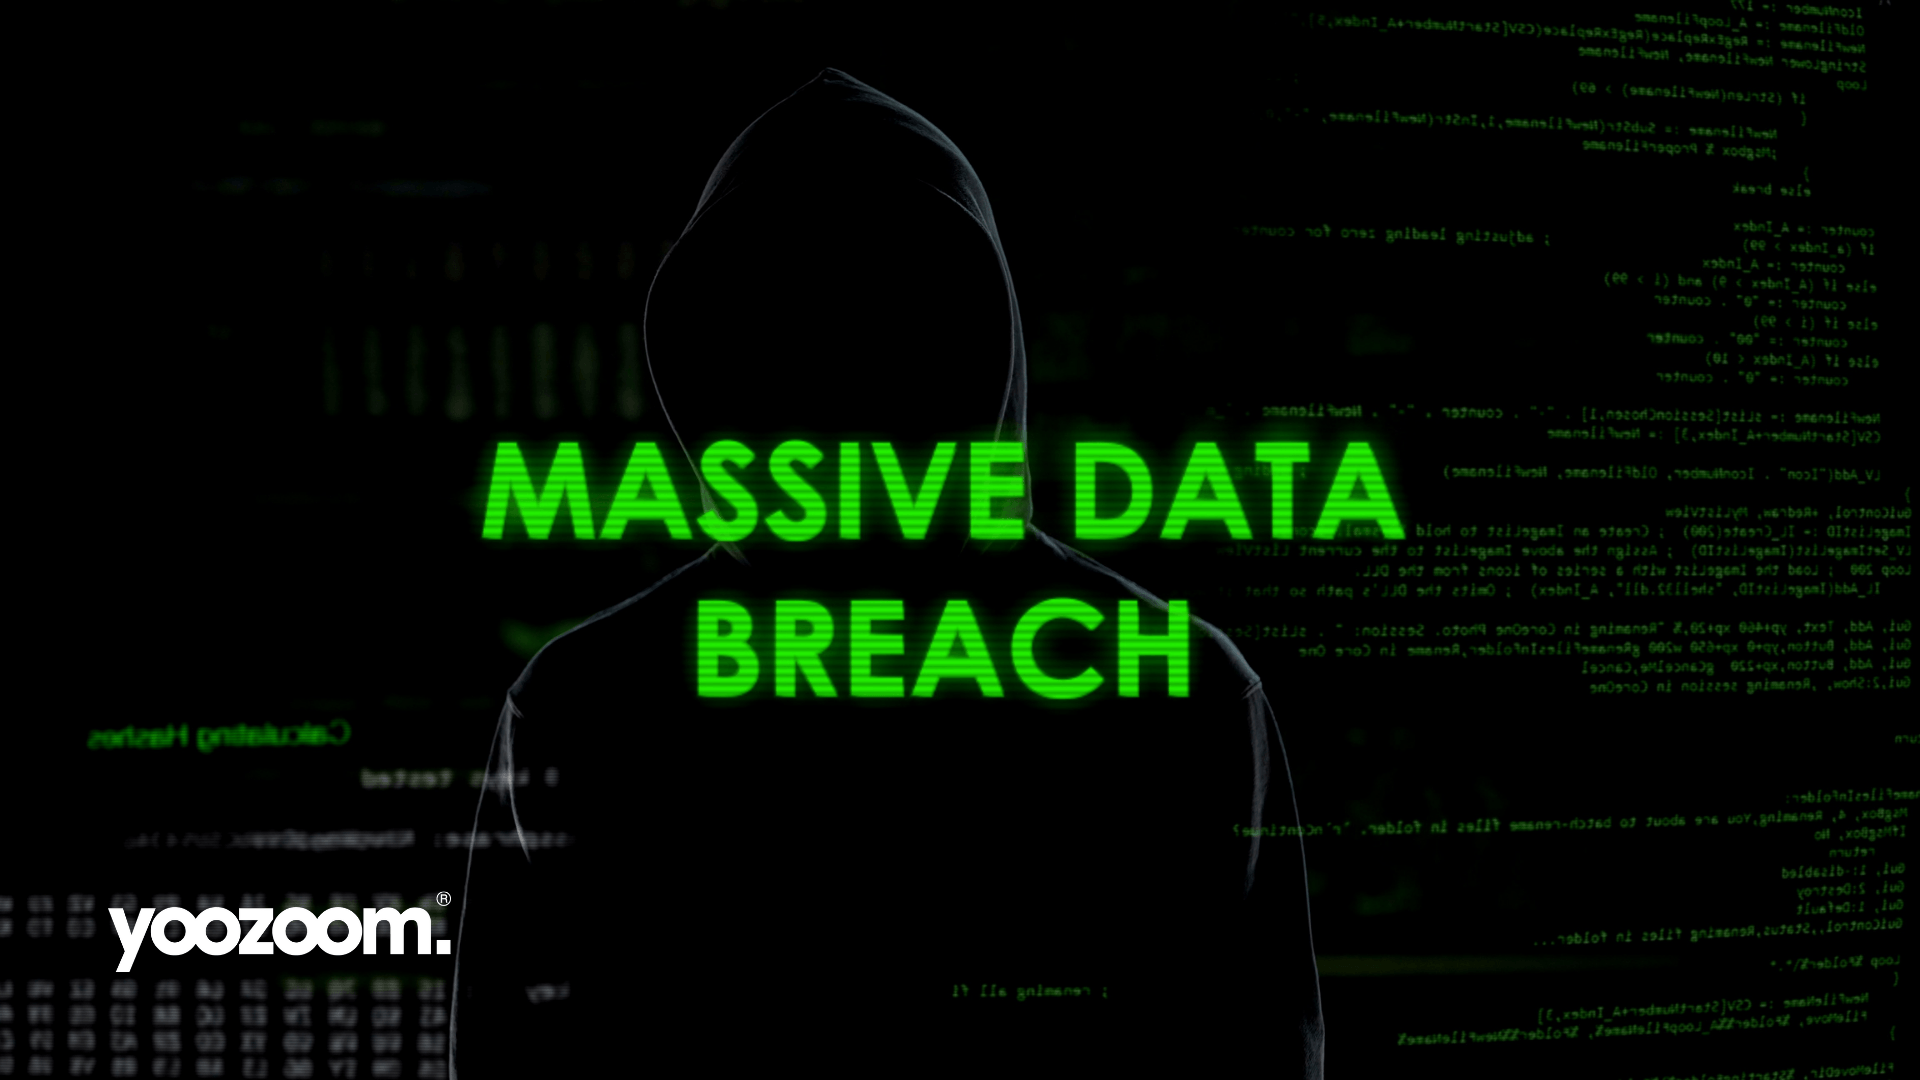 Business data breaches: 11 ways to prevent or manage them